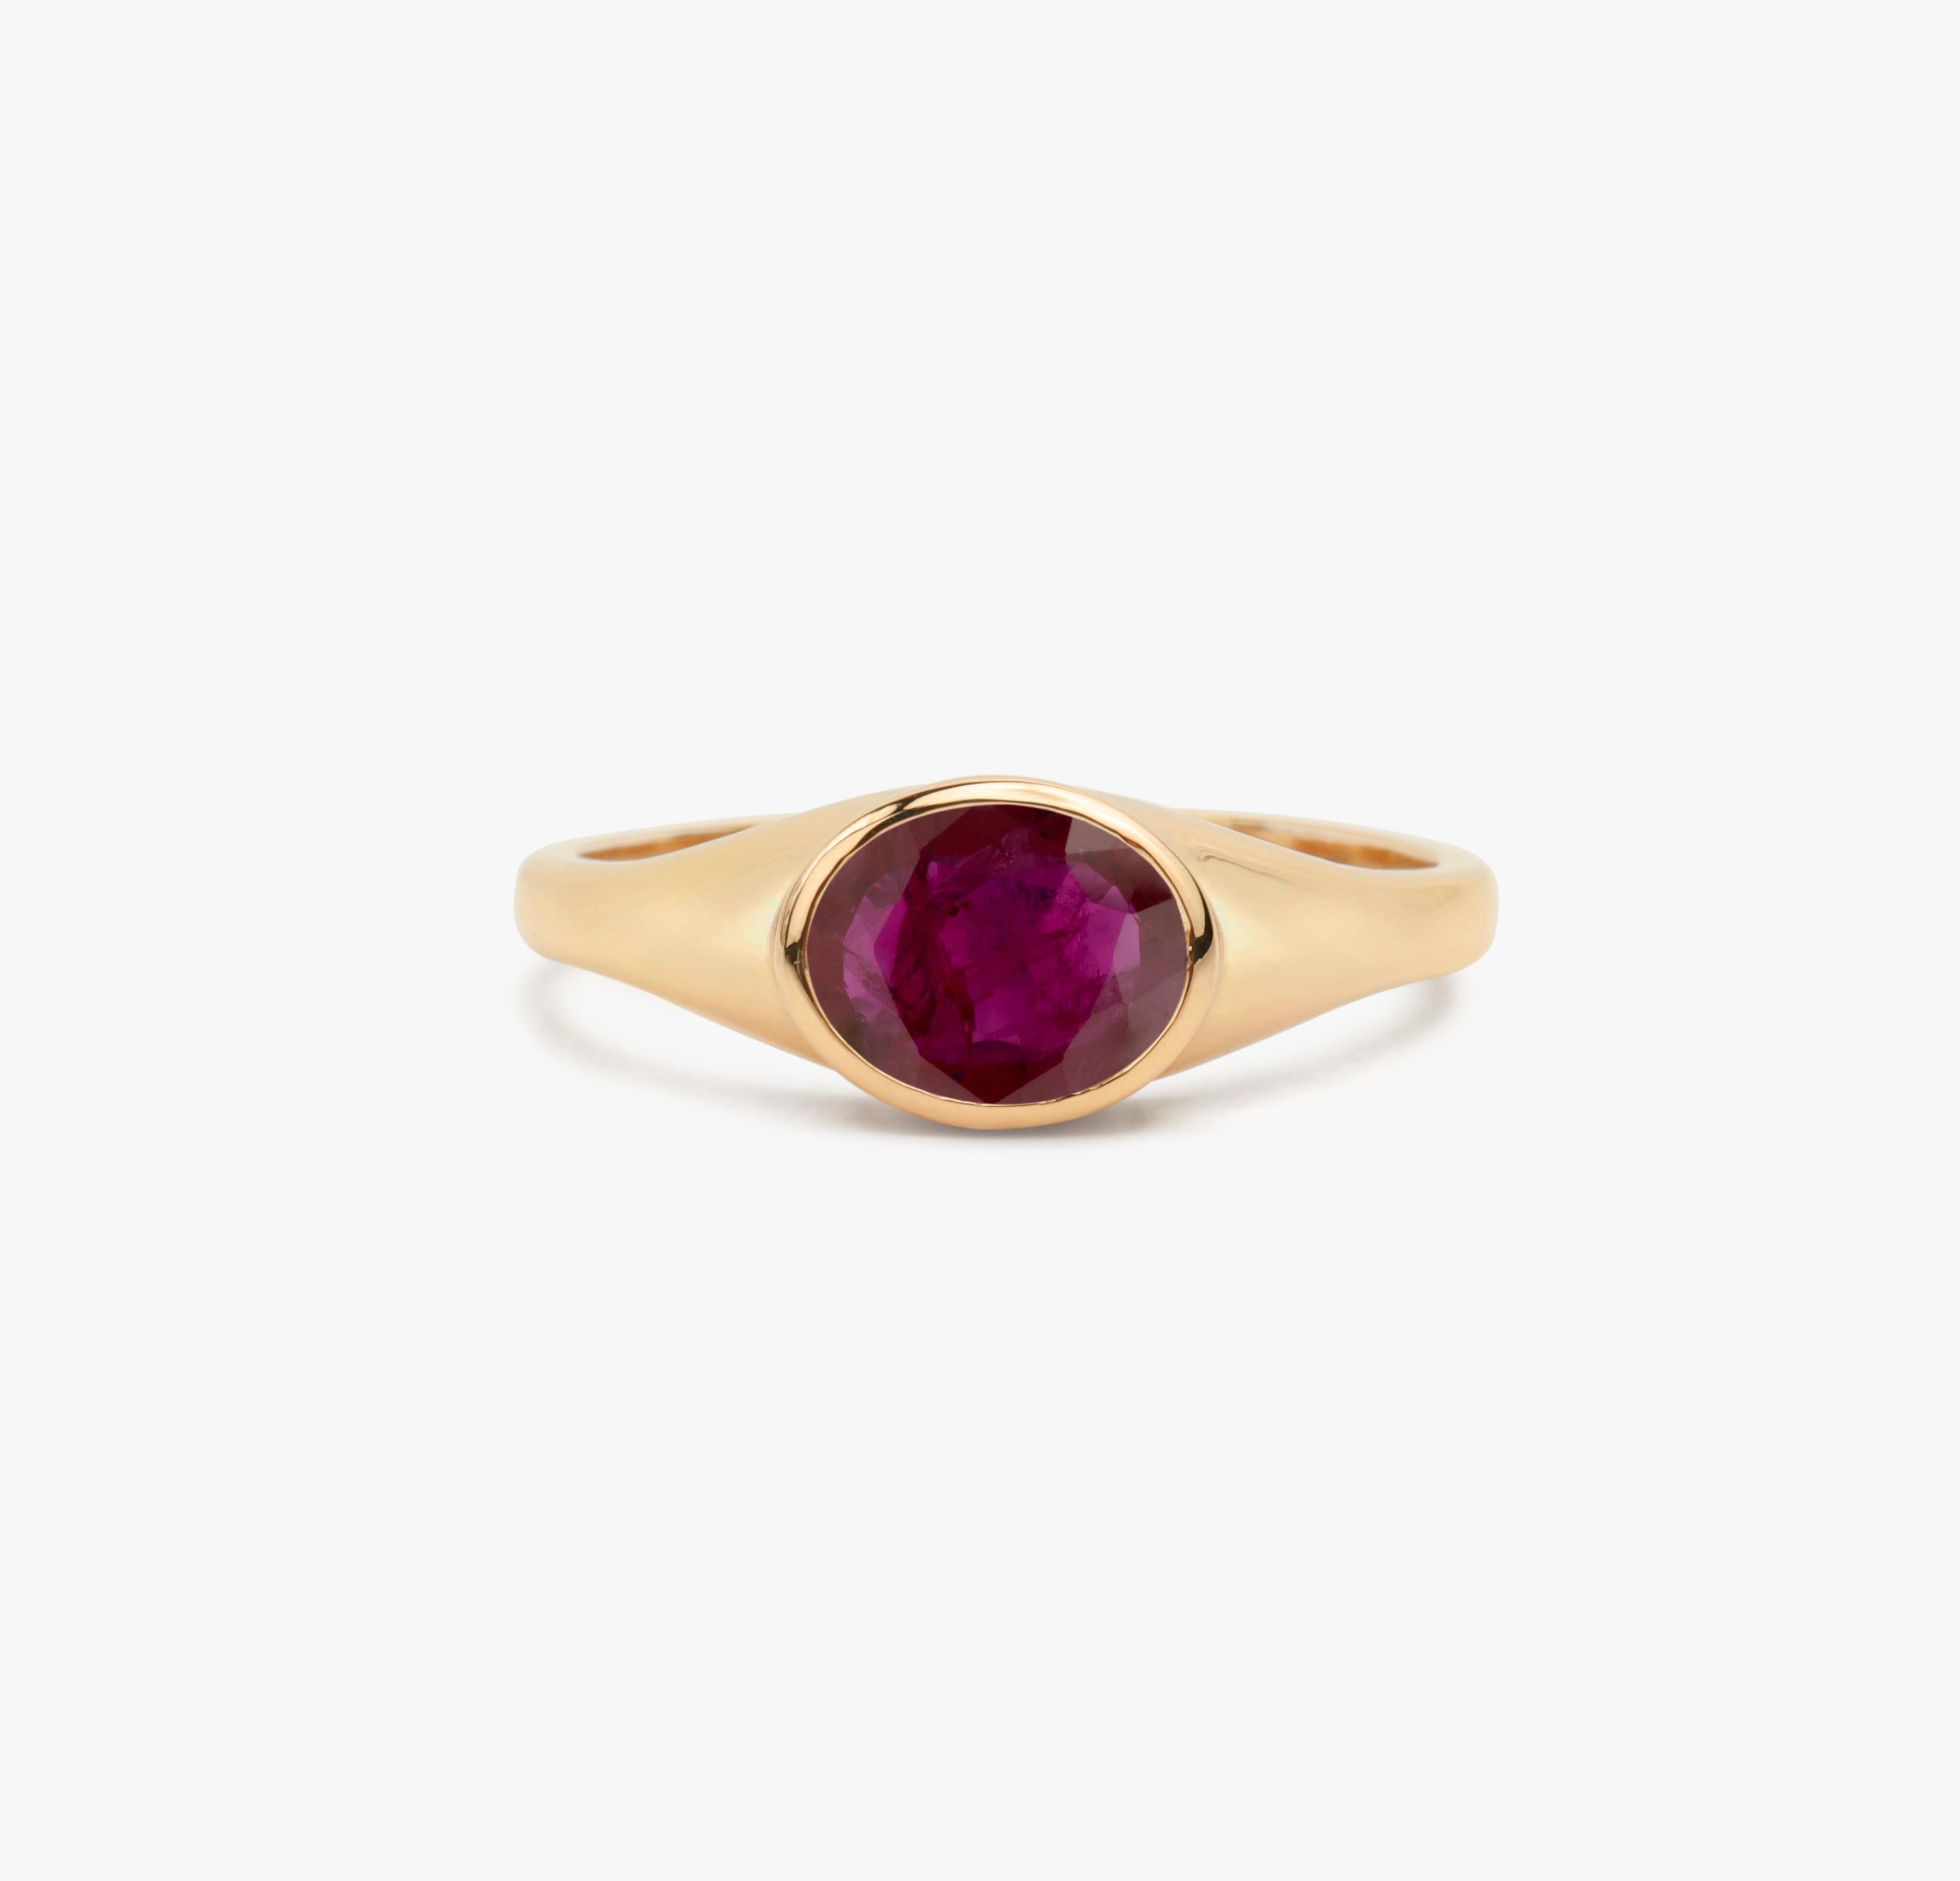 2 Carat Oval Natural Ruby Signet Ring for Men and Women in 18k Solid Gold  

Available in 18k Yellow gold.

Same design can be made also with other custom gemstones per request.

Product details:

- Solid gold (18k Yellow)

- Main stone - approx. 2